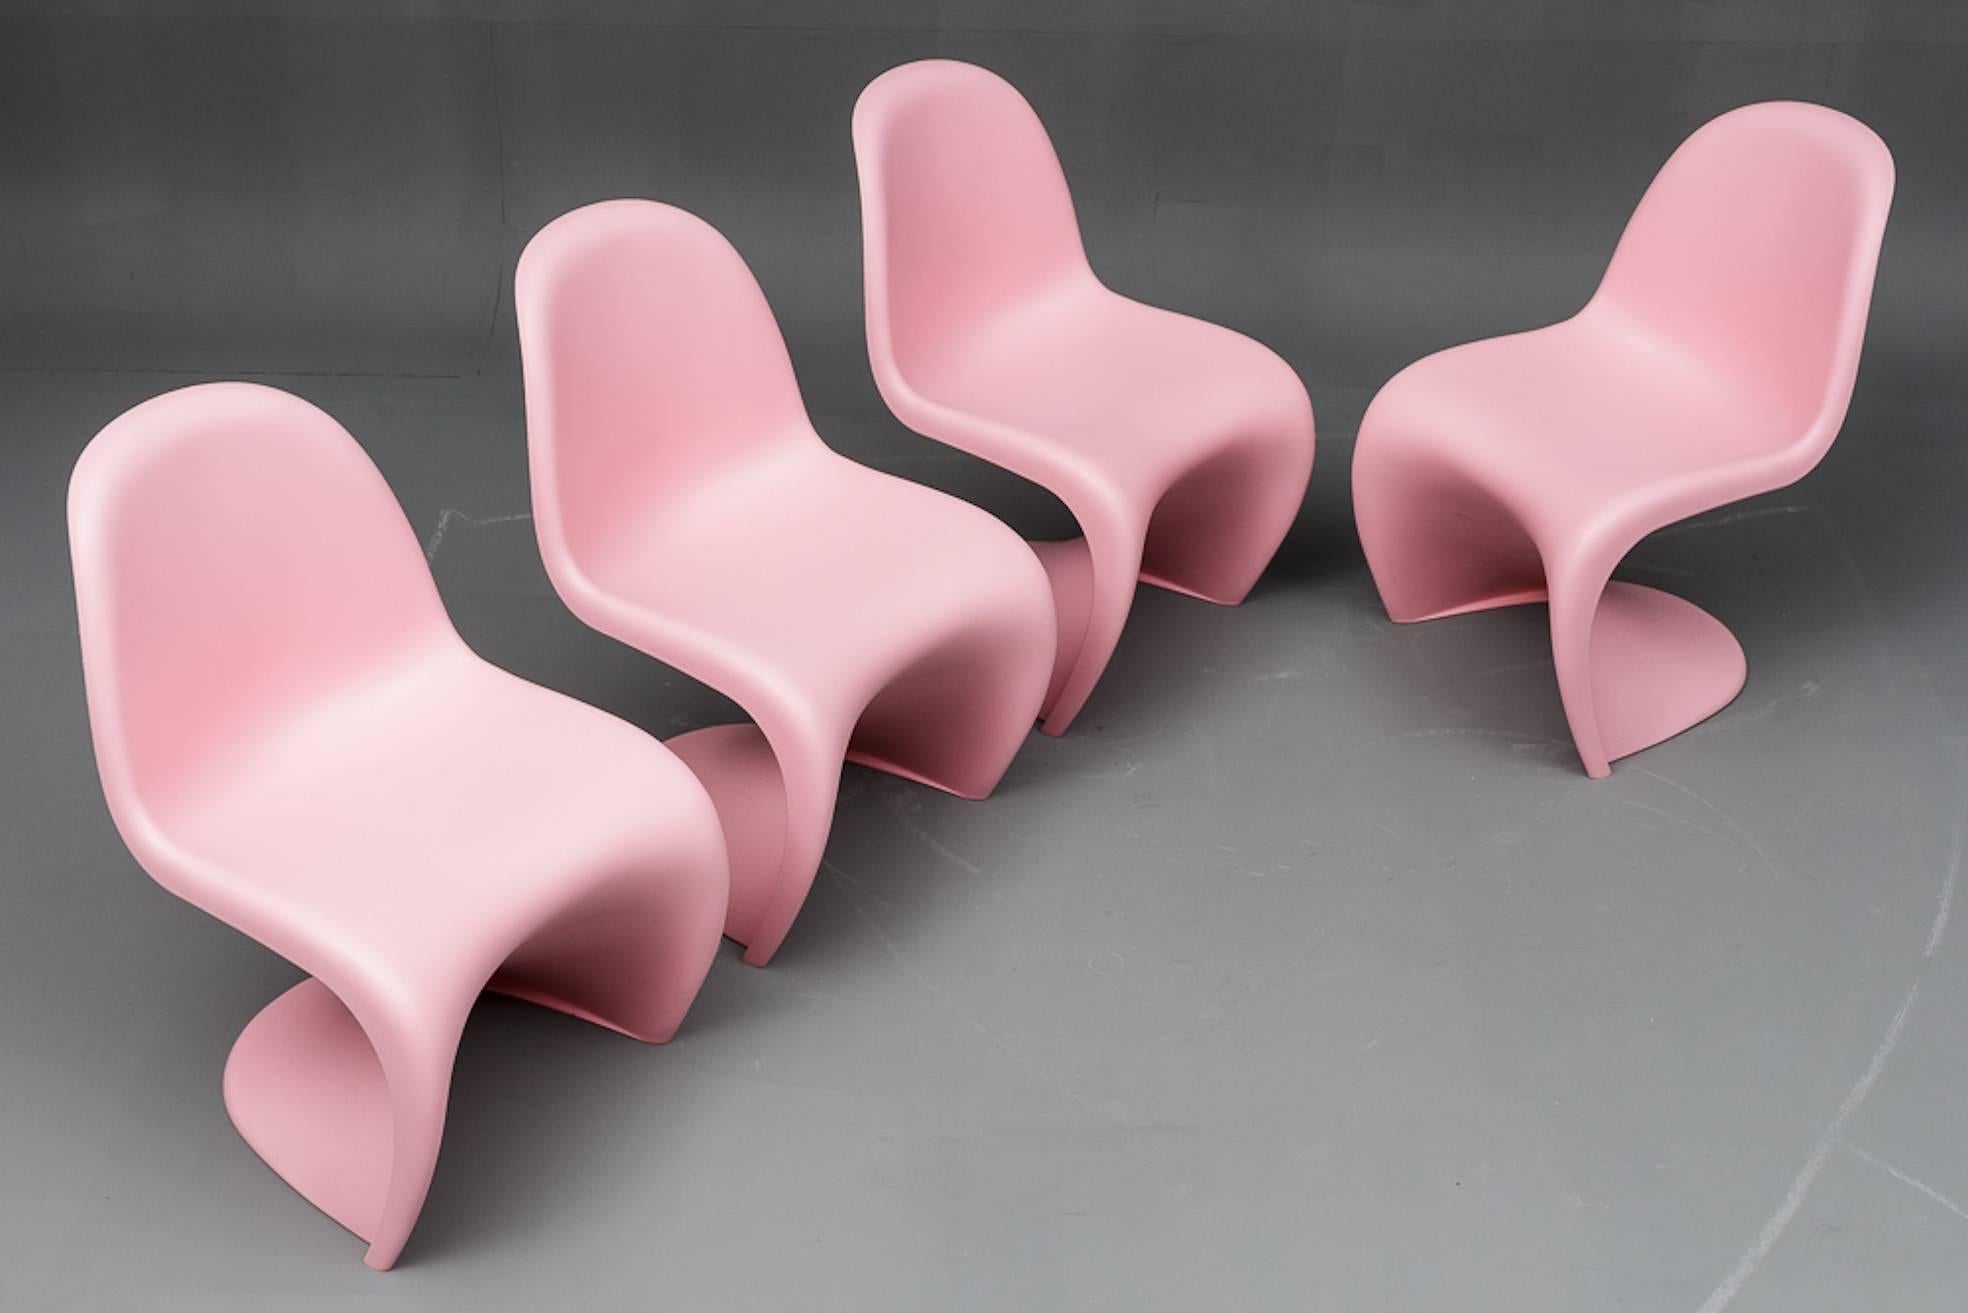 A iconic white stacking chair by influential Danish architect and designer Verner Panton (1926-1998). This cantilevered, stackable chair is the first single-form, injection-molded plastic chair ever produced. A masterpiece of design and technology.